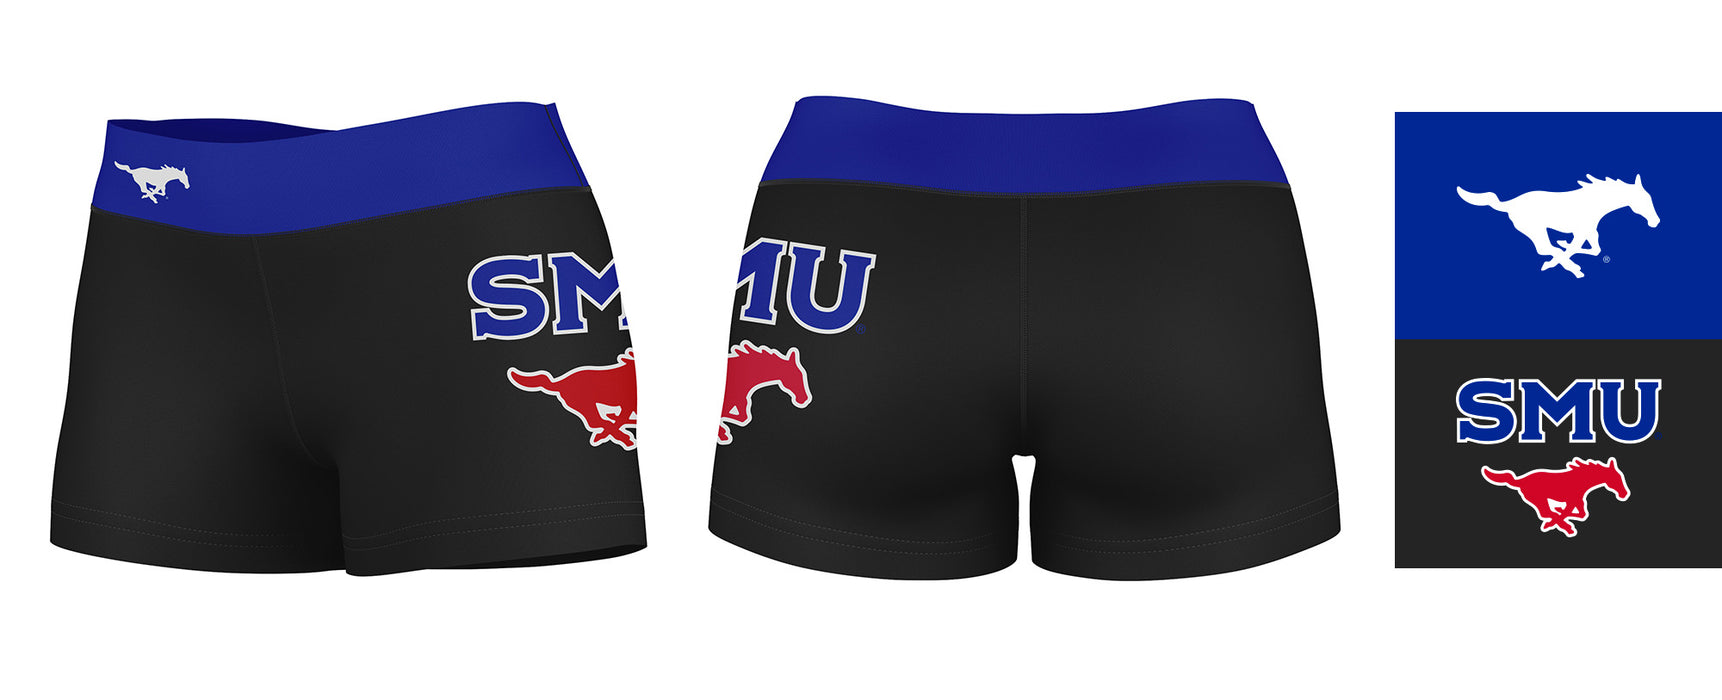 SMU Mustangs Vive La Fete Game Day Logo on Thigh and Waistband Black & Blue Women Yoga Booty Workout Shorts 3.75 Inseam" - Vive La Fête - Online Apparel Store